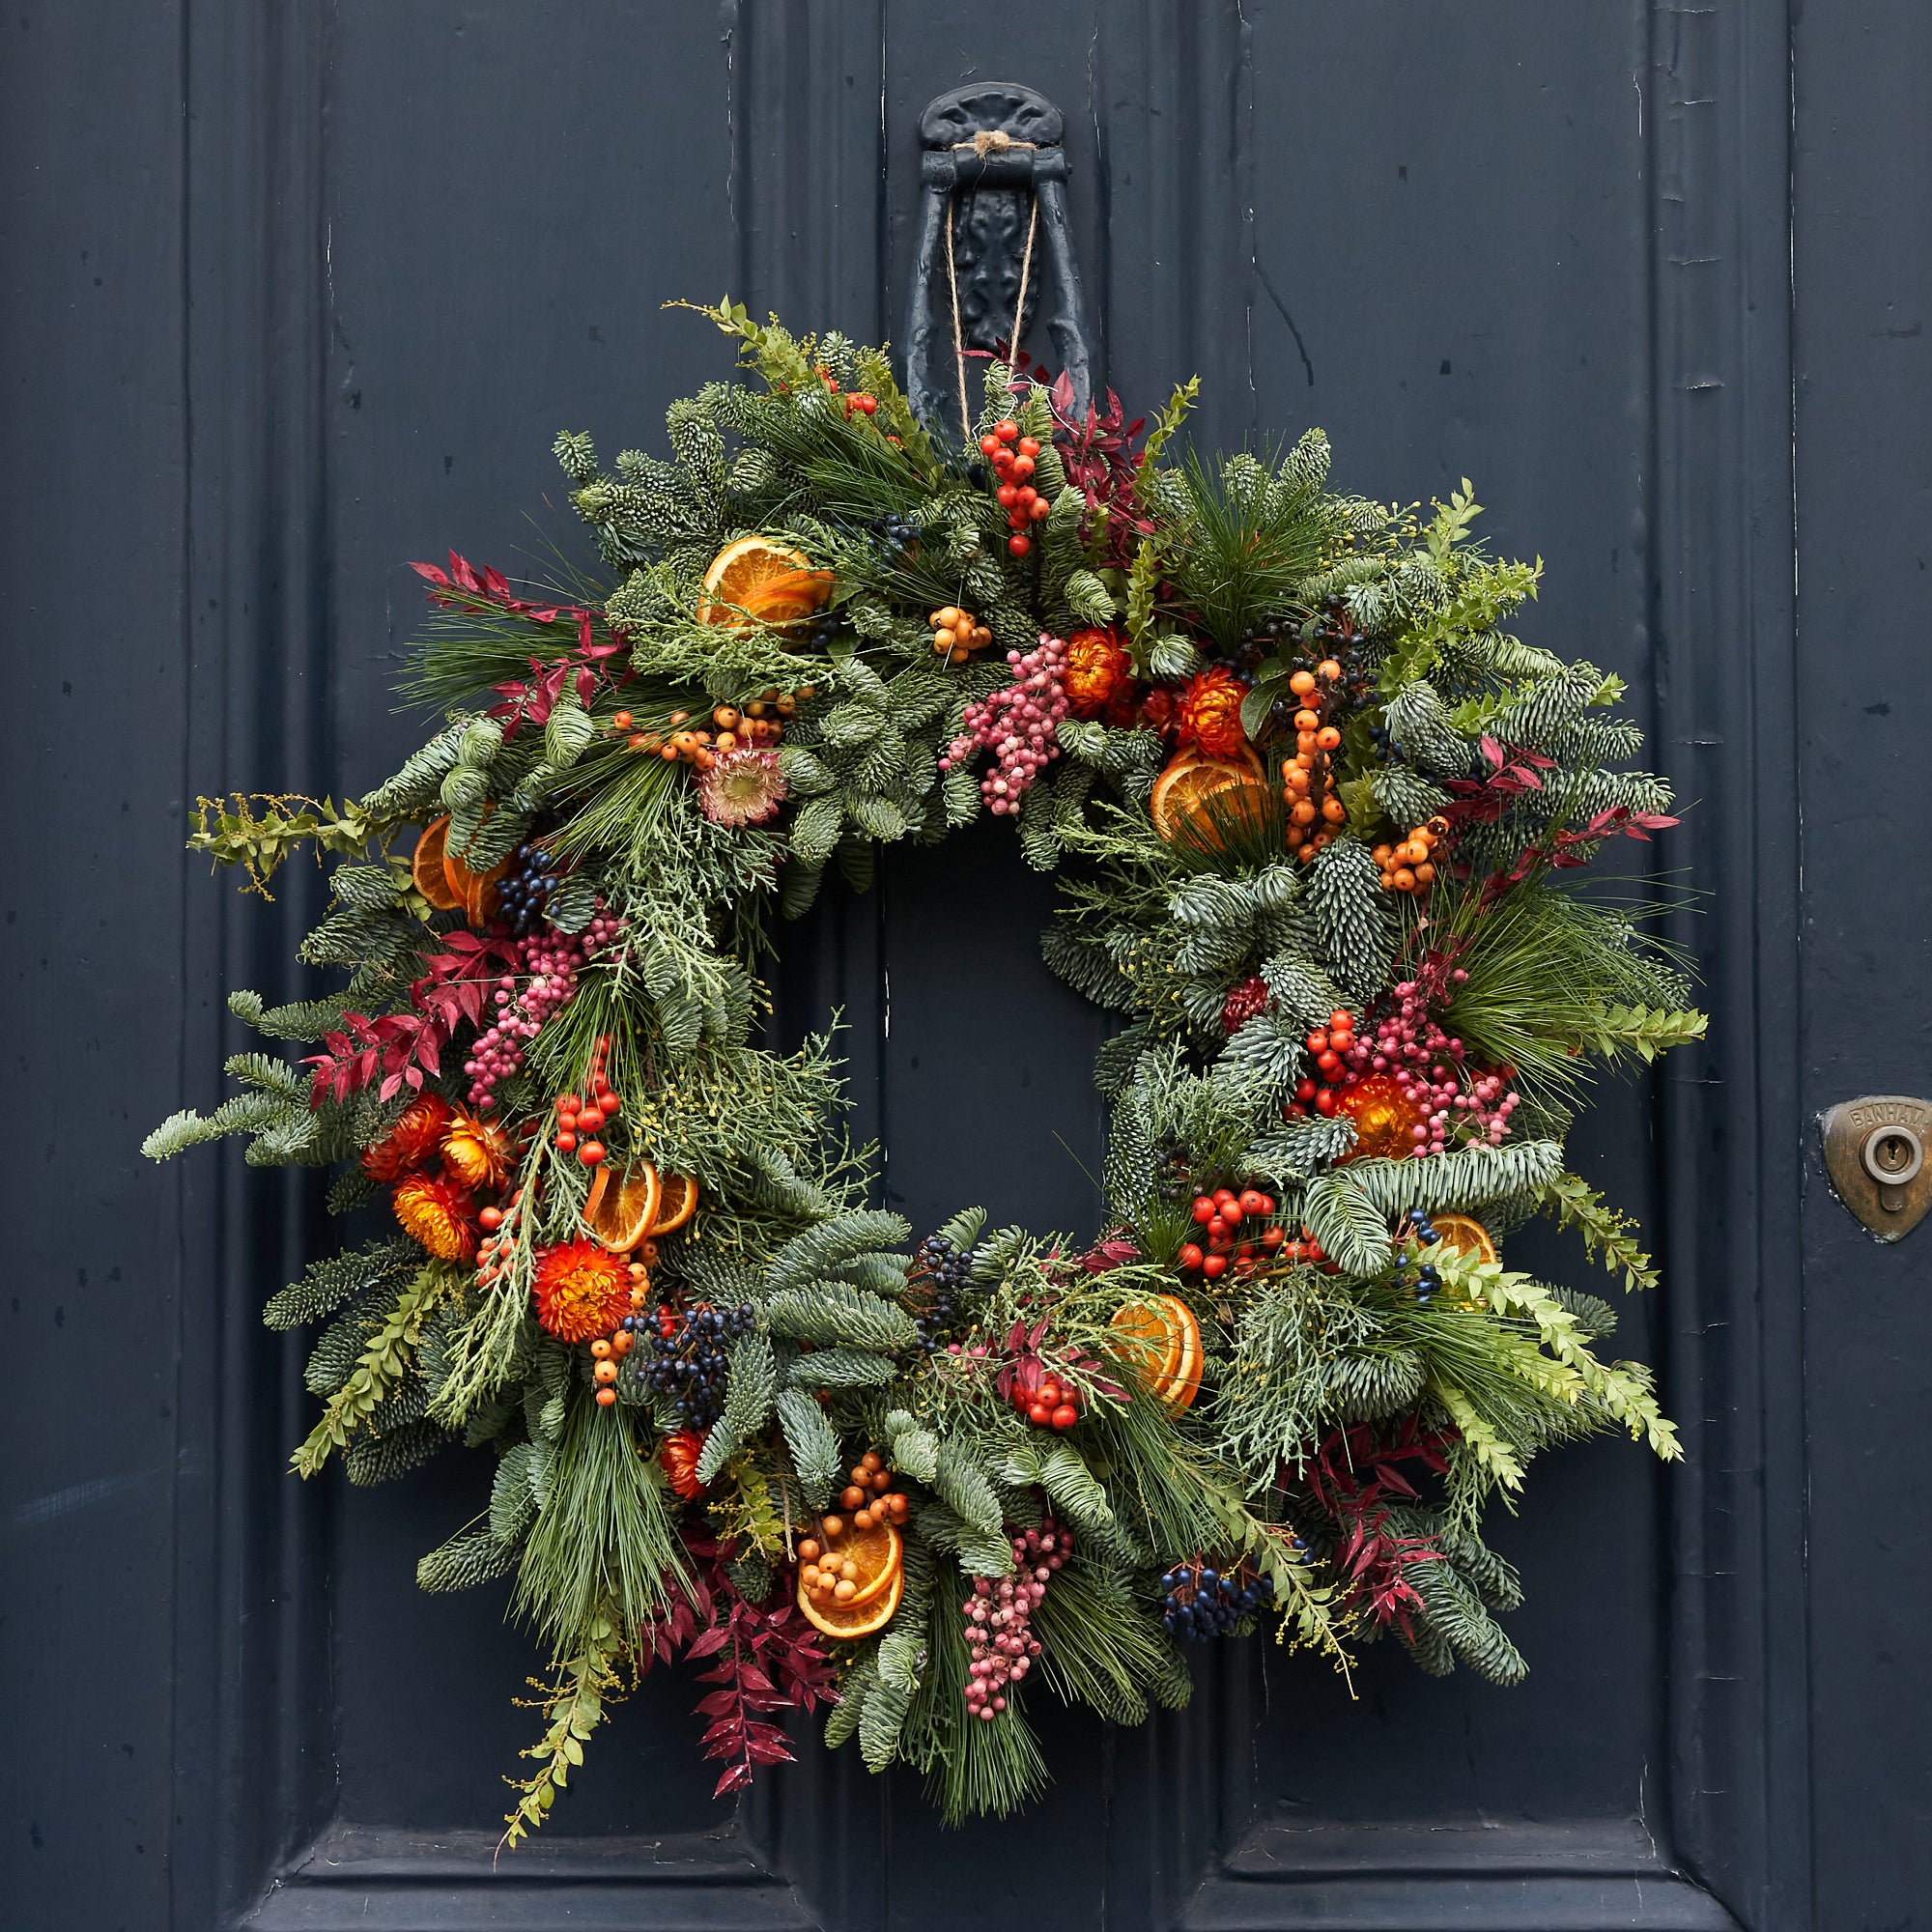 Christmas wreath with dried orange, red berries and dried flowers arranged in a contemporary modern style by Botanique Workshop London